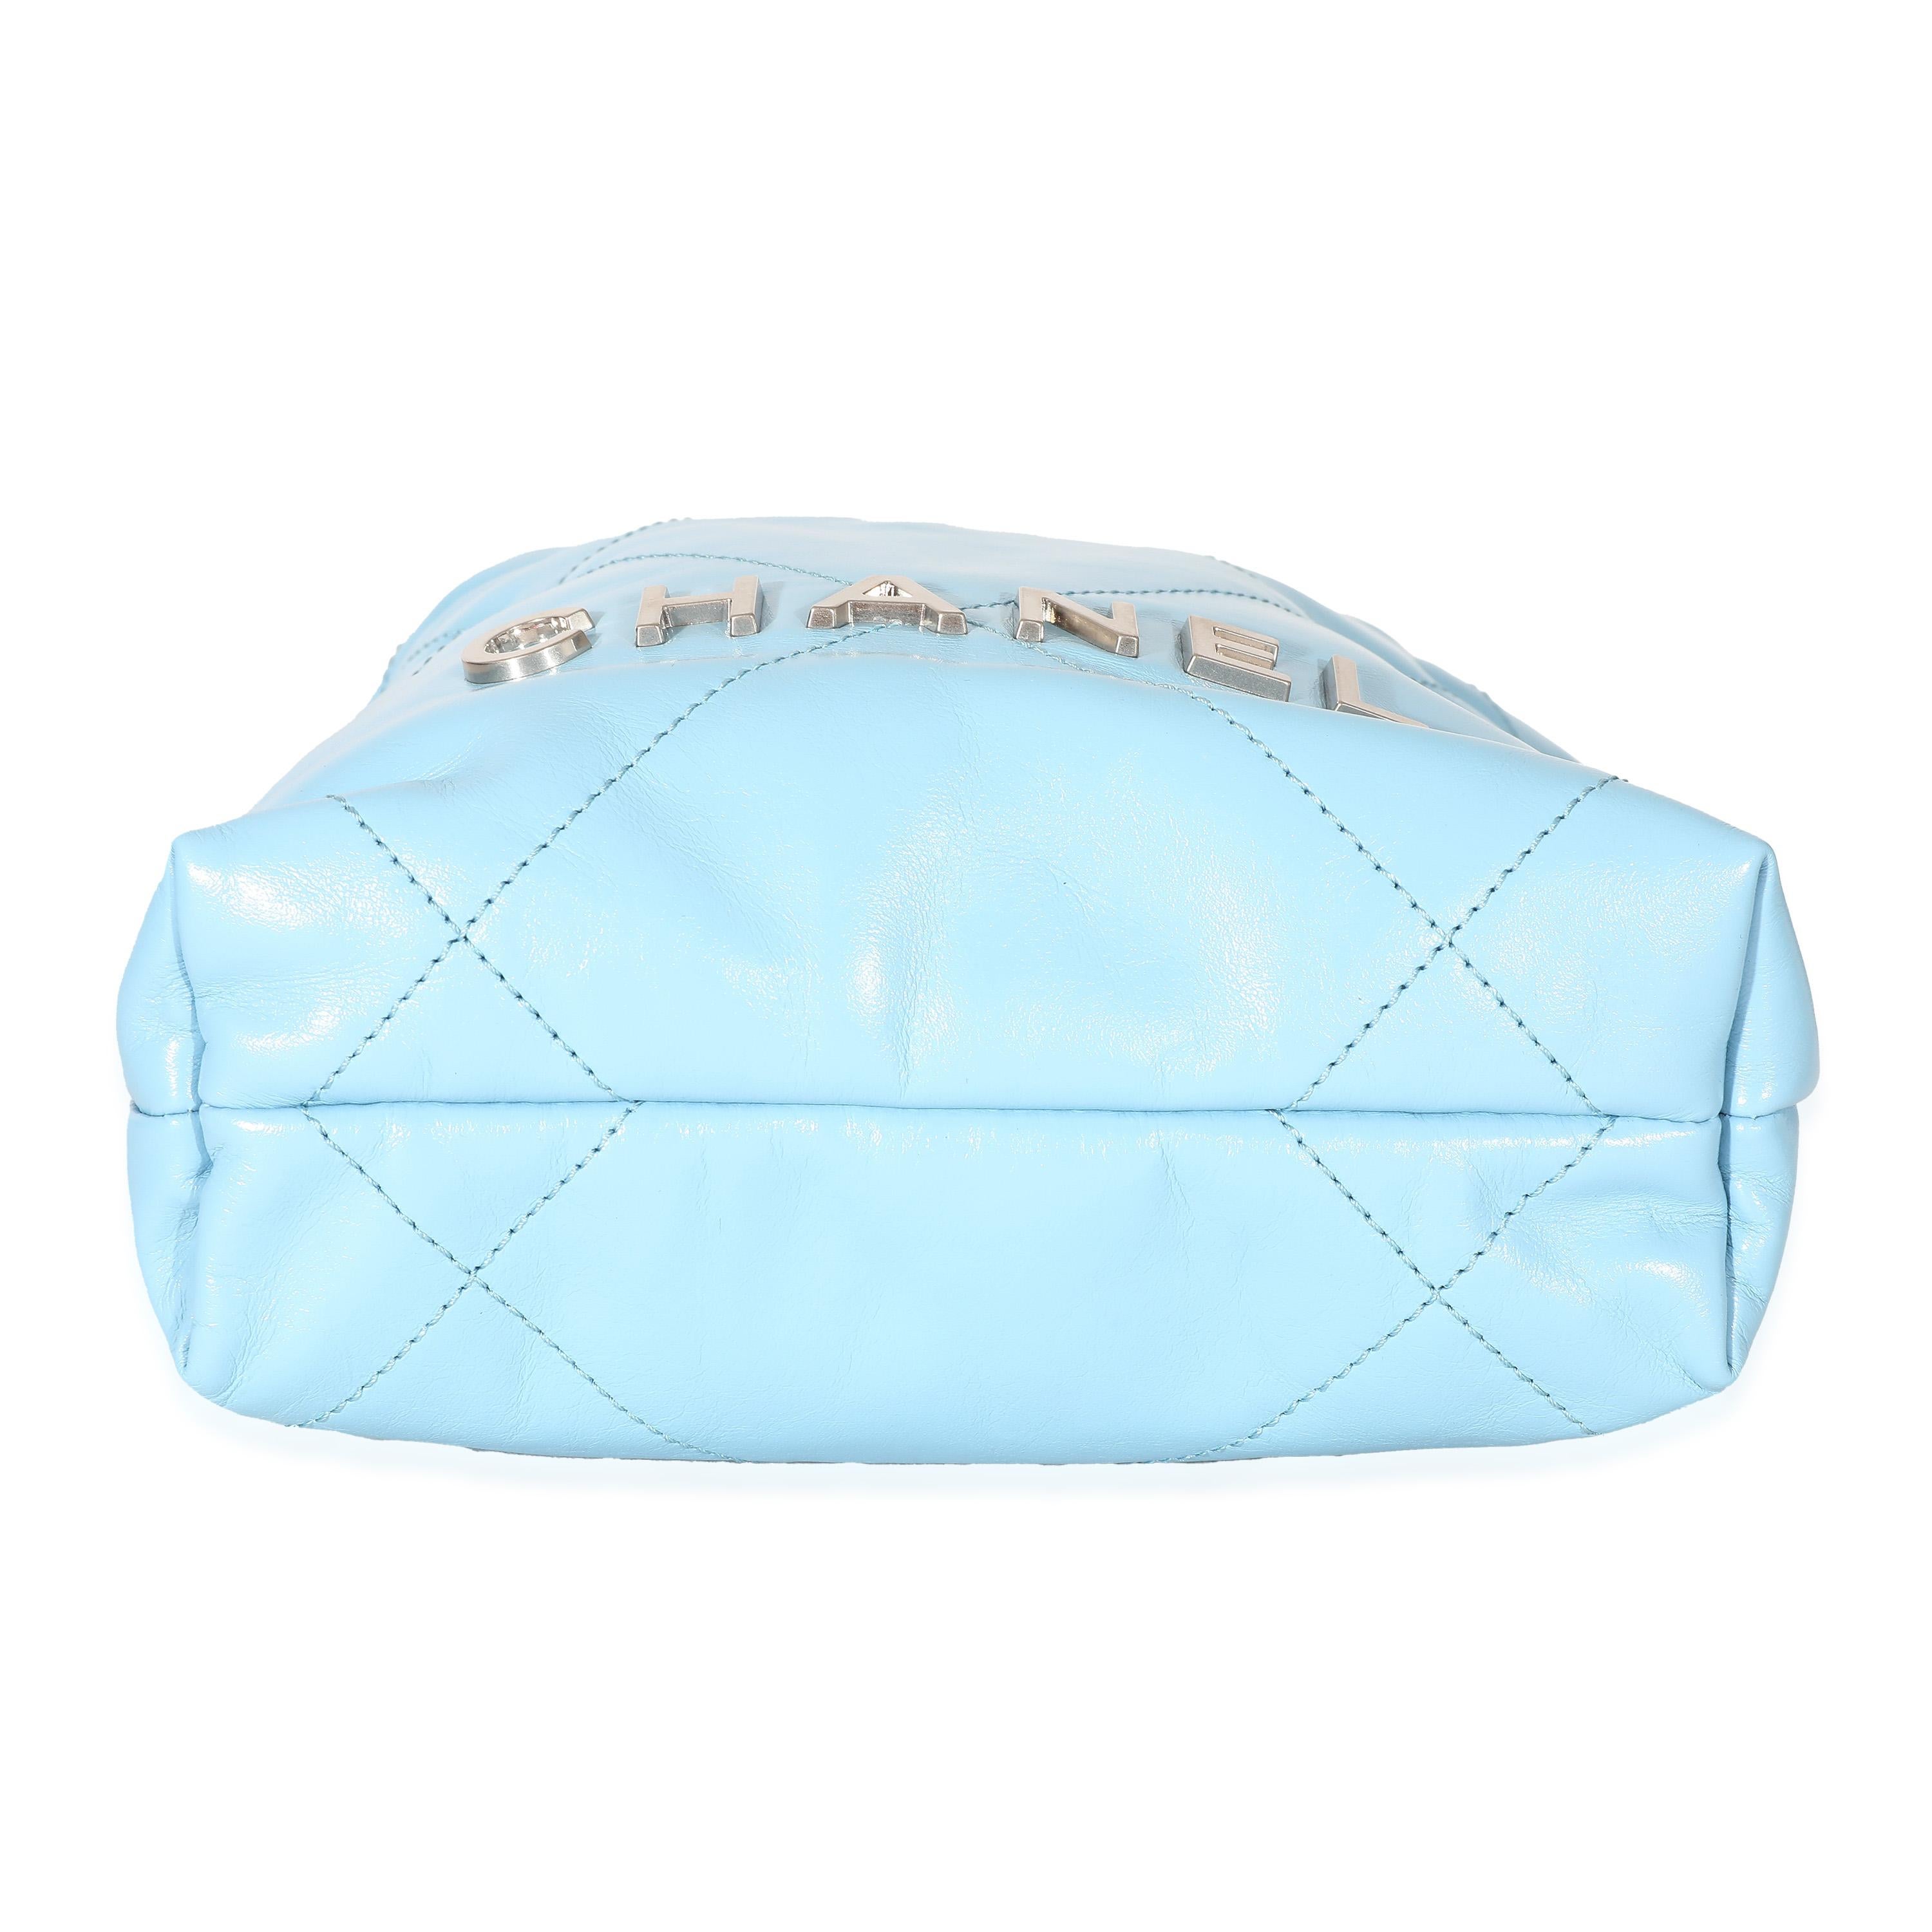 Listing Title: Chanel Light Blue Shiny Quilted Calfskin Mini 22
SKU: 134033
Condition: Pre-owned 
Handbag Condition: Excellent
Condition Comments: Item is in excellent condition and displays light signs of wear. Faint interior scuffing.
Brand: